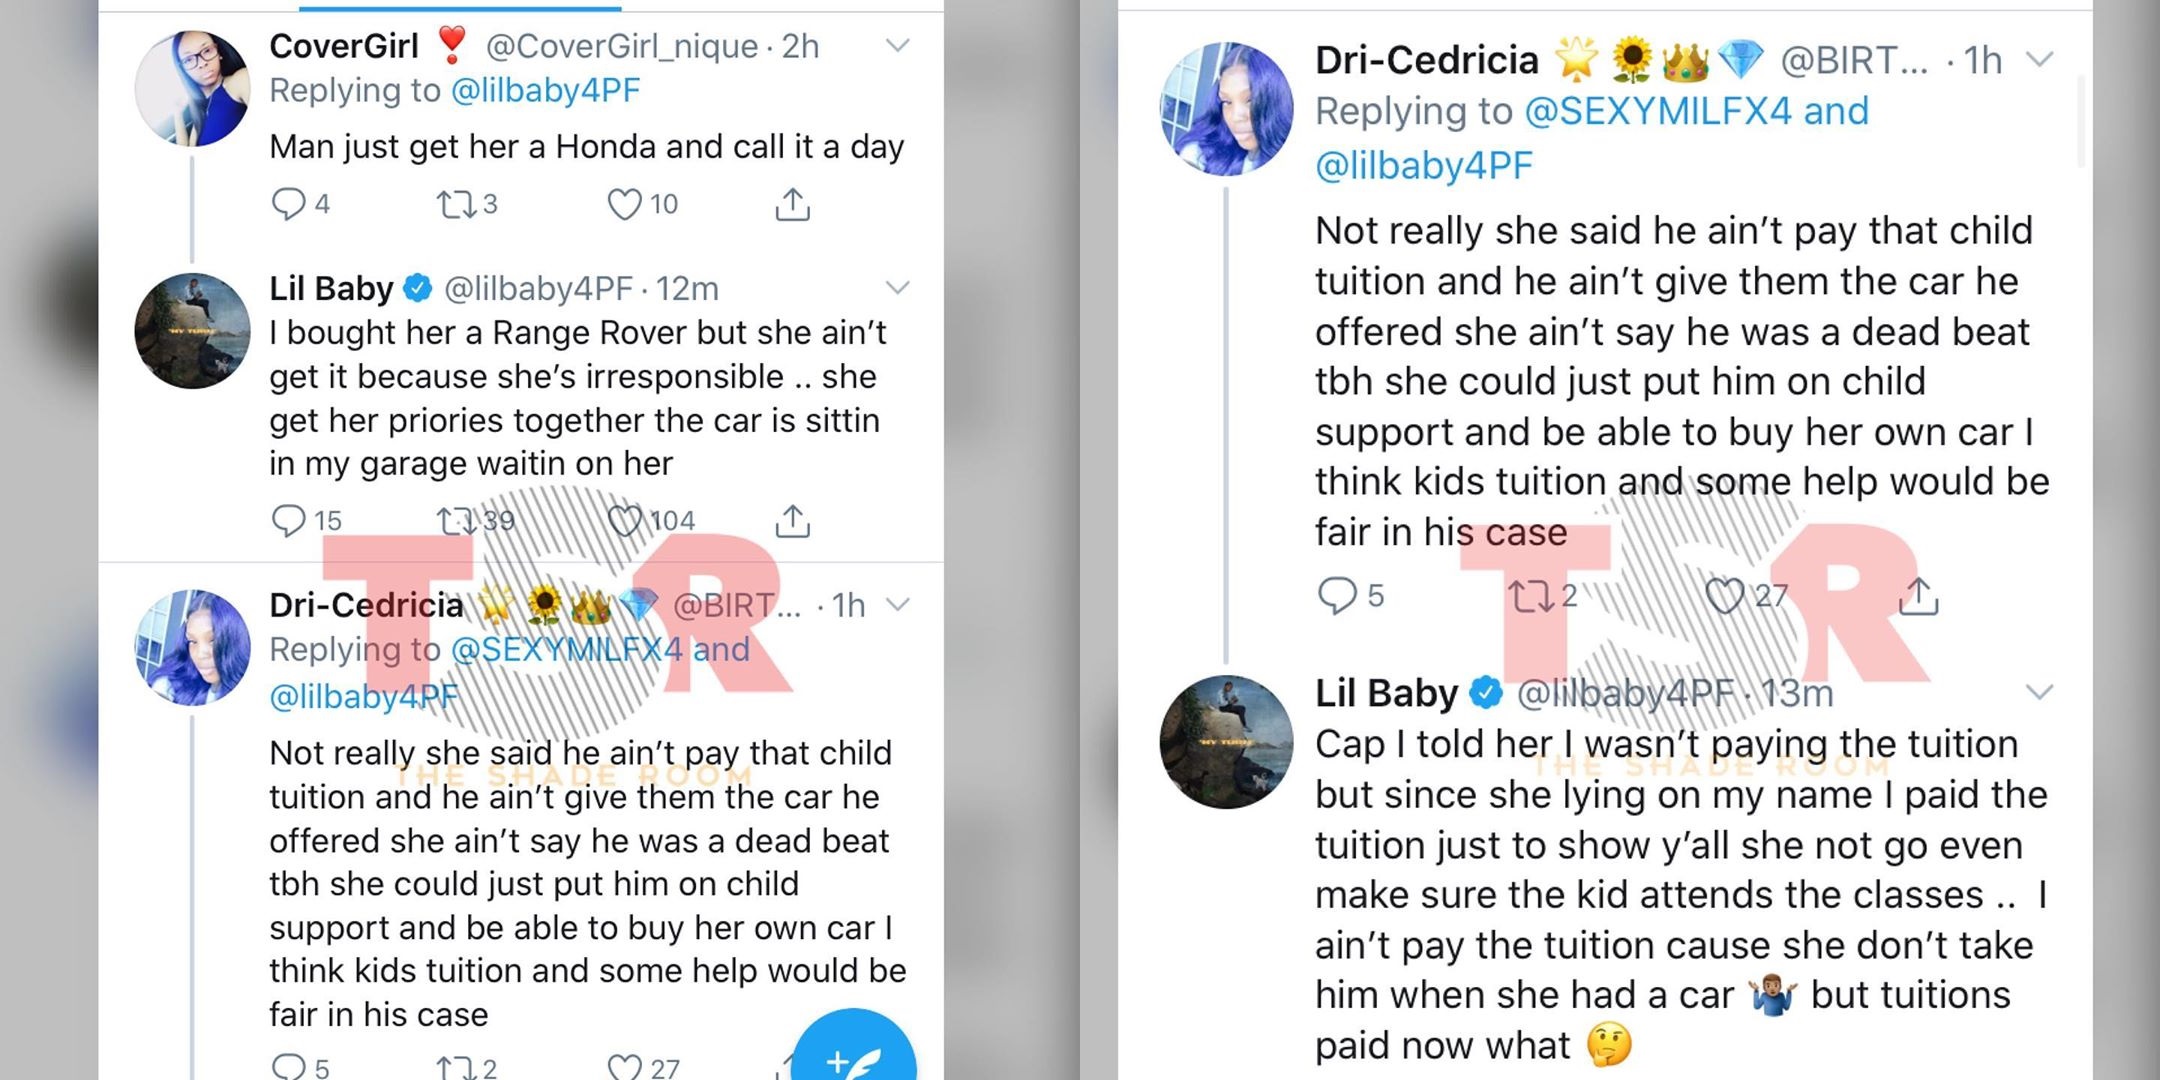 Lil Baby refutes Ayesha (@littlems.golden)'s claims that he does nothing for their son, Jason. Without mentioning his other baby, or his mother, Baby spoke on what he's done for Ayesha and Jason. Lil Baby said he bought her a Range Rover, but she acted irresponsibly with it, and that he gave her money for Jason's tuition, but didn't make him attend classes, but made it clear he takes care of both of his children.